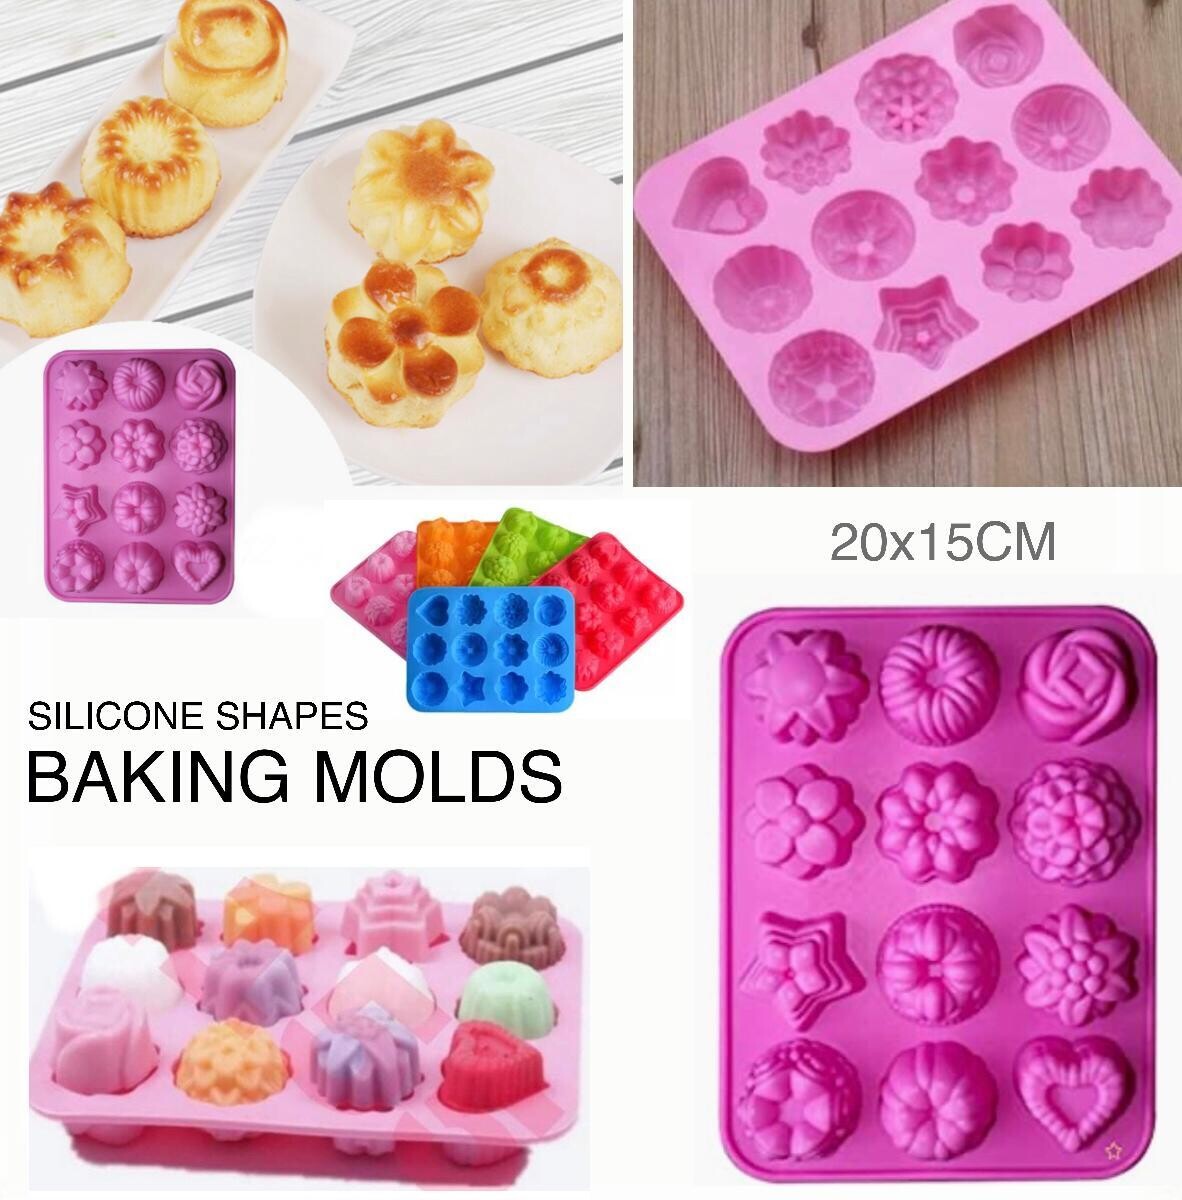 Silicone Shapes Molds